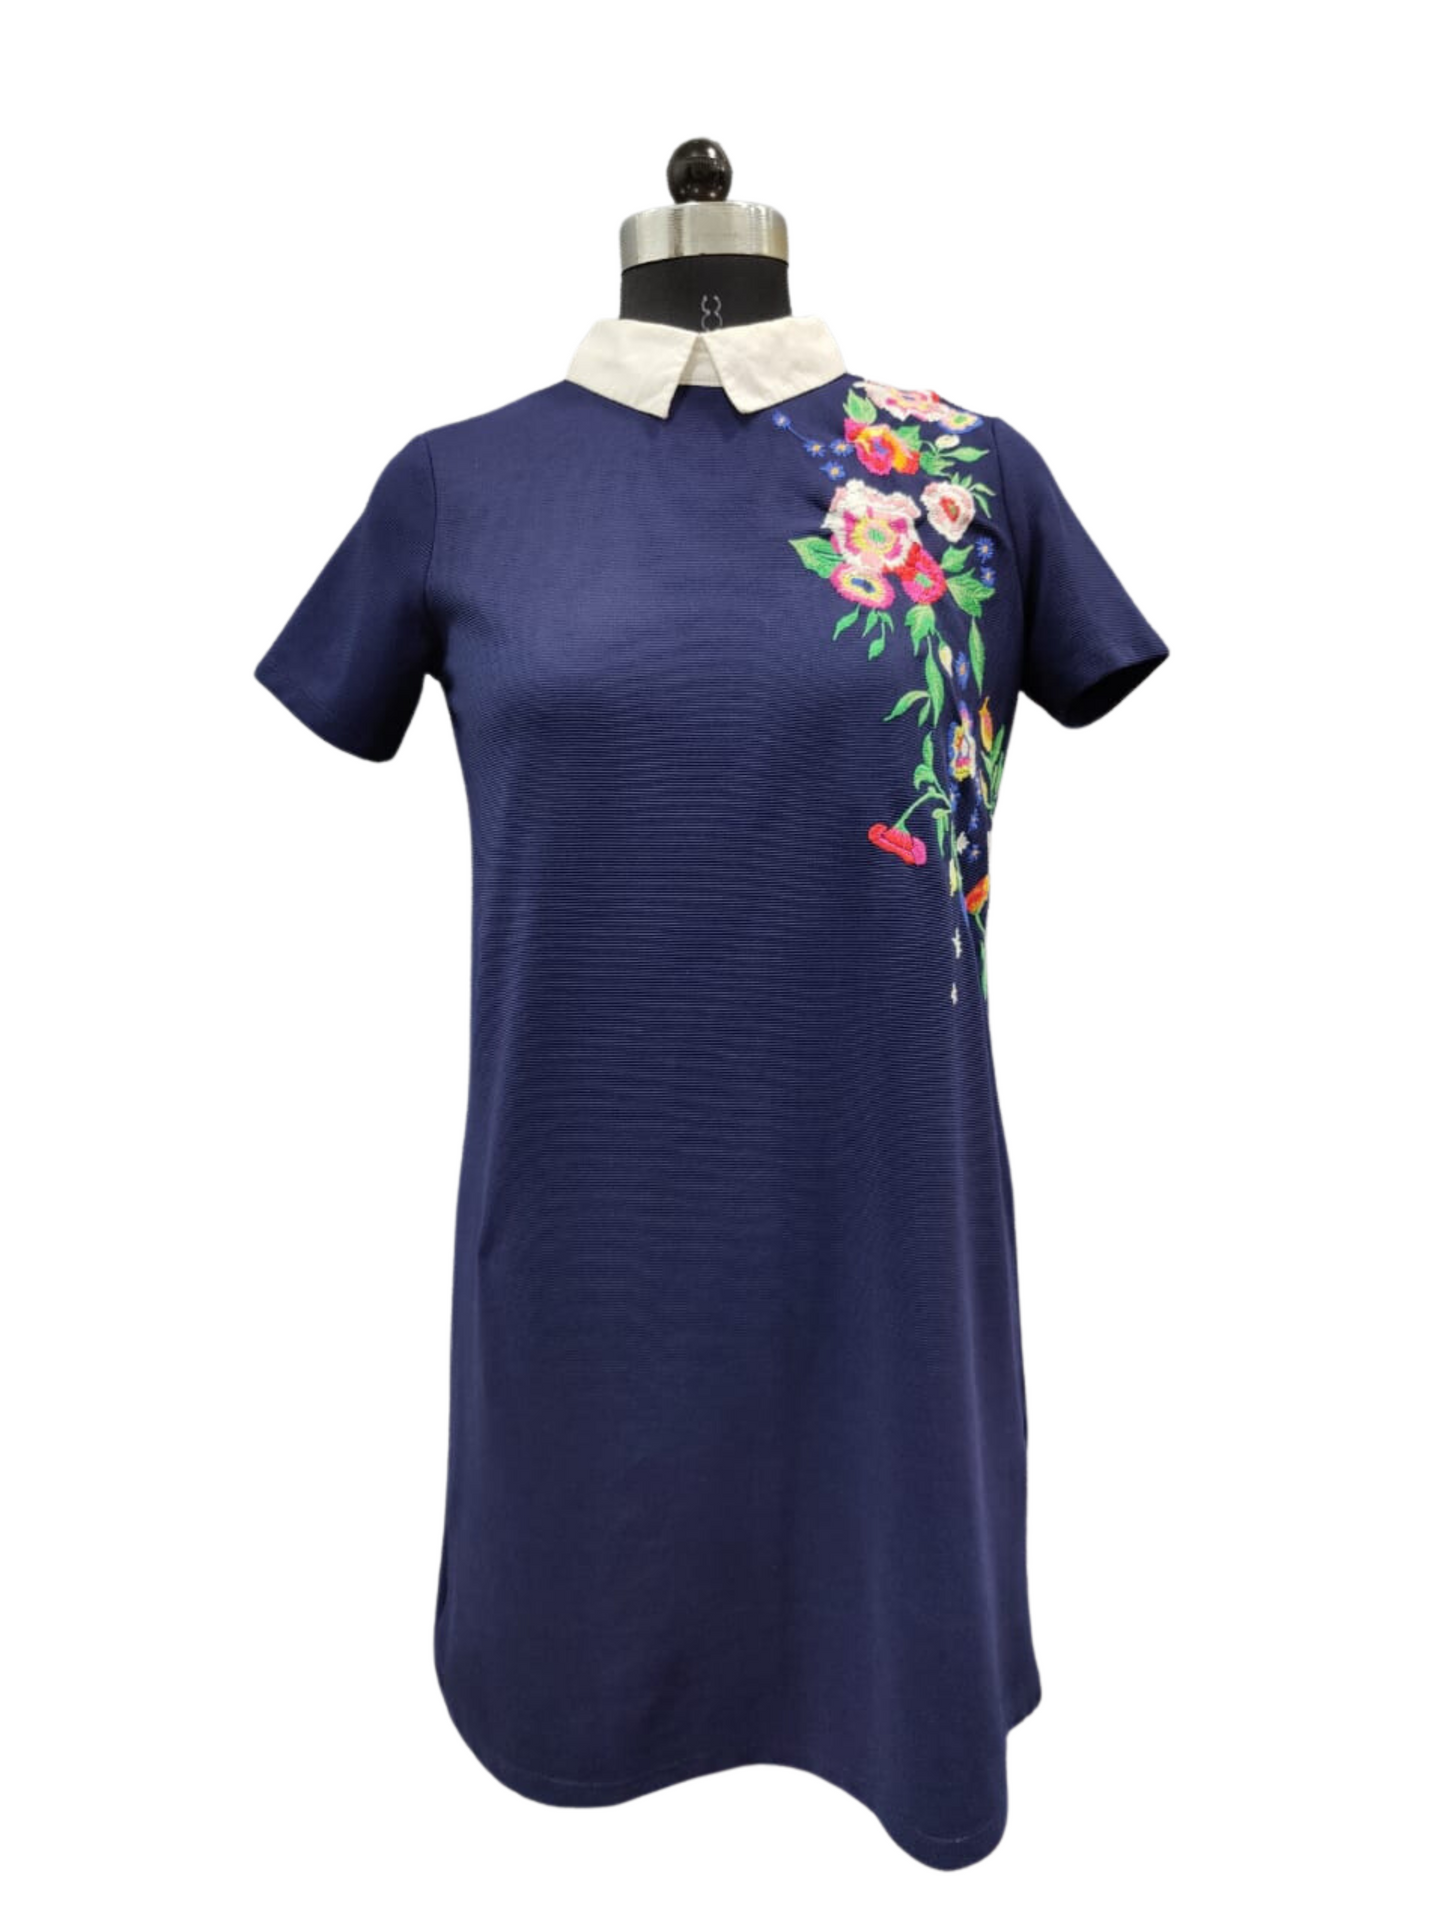 ZARA Navy Blue Floral Embroidered Collared Shift Dress | Relove